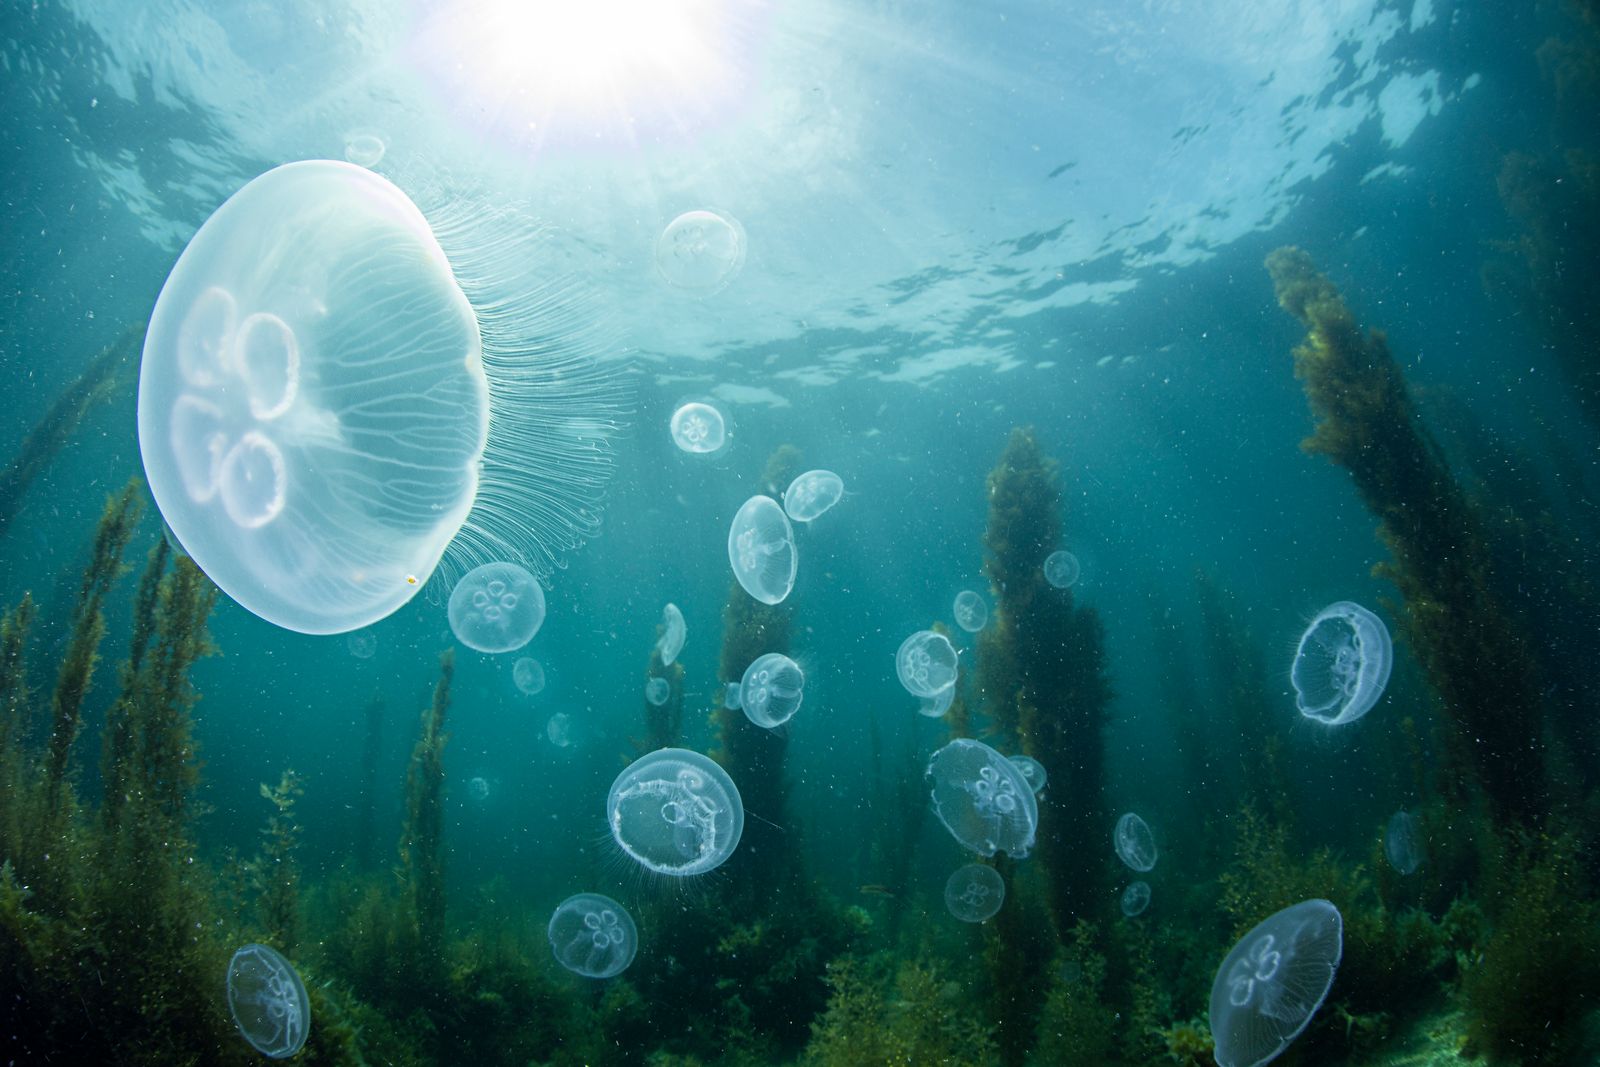 Magical moment with Moon jellyfish and Kelp forest